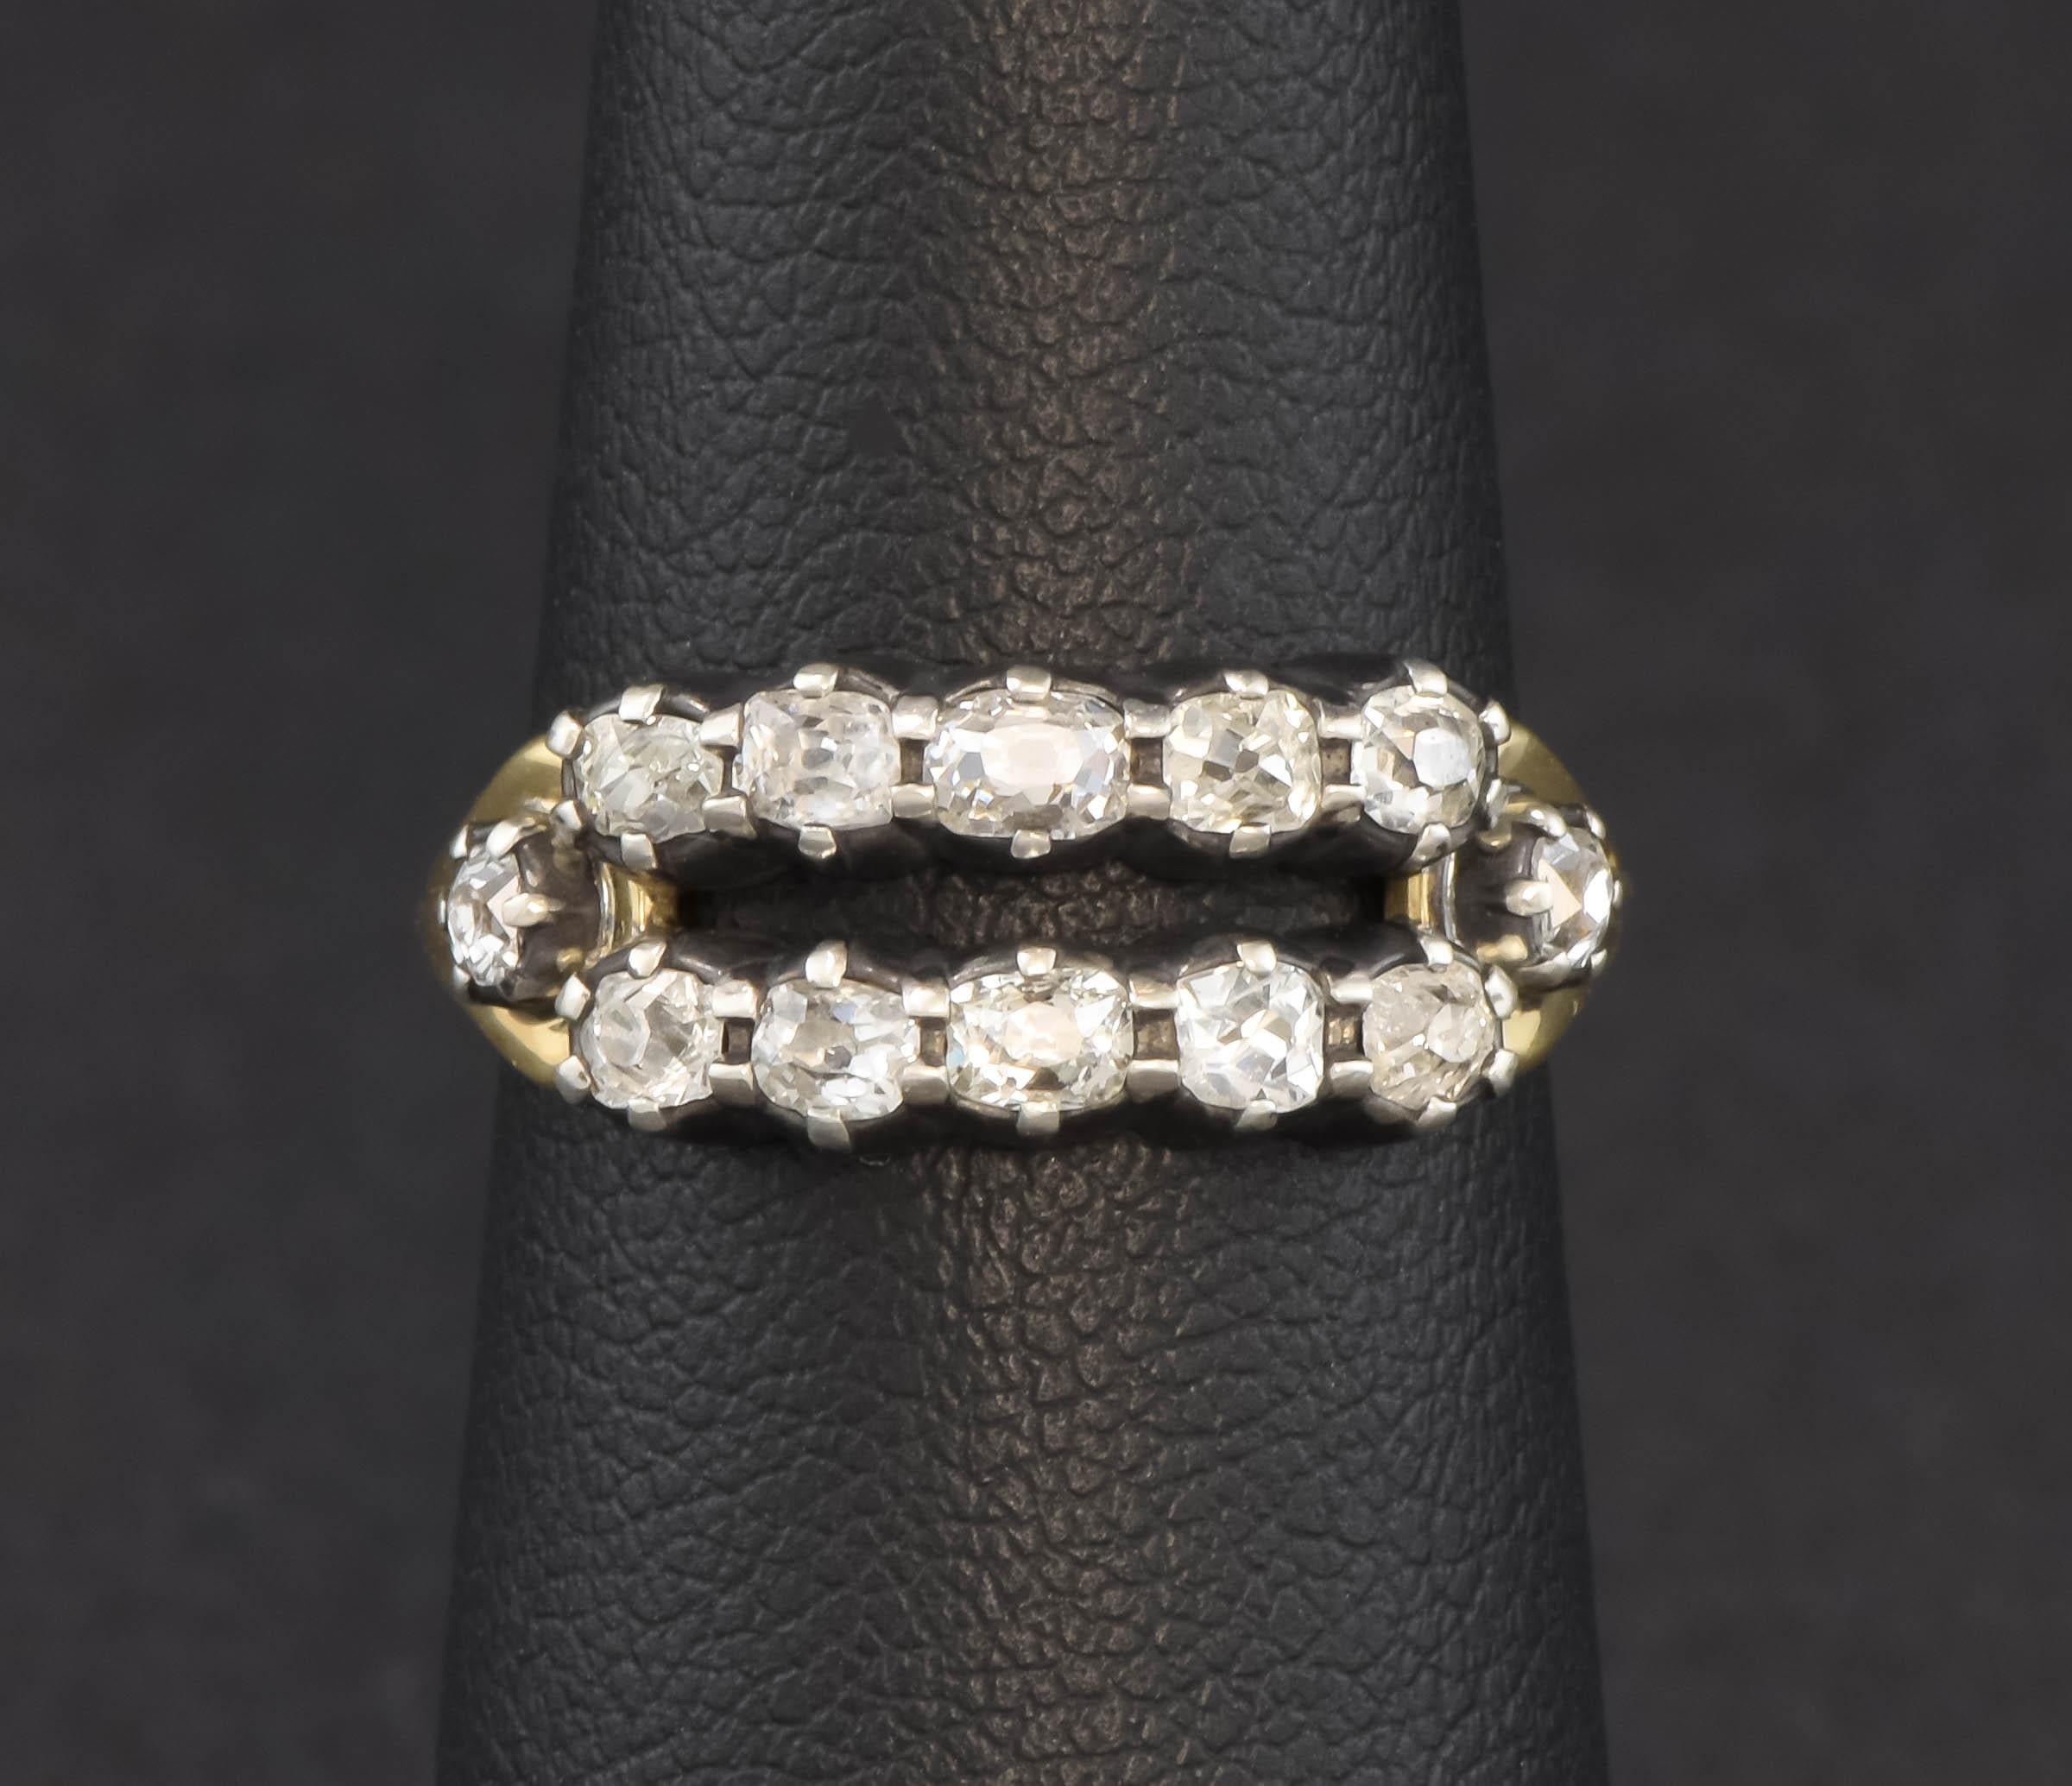 I'm delighted to offer one more ring that I've made from a suite of late Georgian diamonds I rescued from an antique French brooch.  This one-of-a-kind piece is quite special as it's a geometric double row ring that would make an amazing wedding or